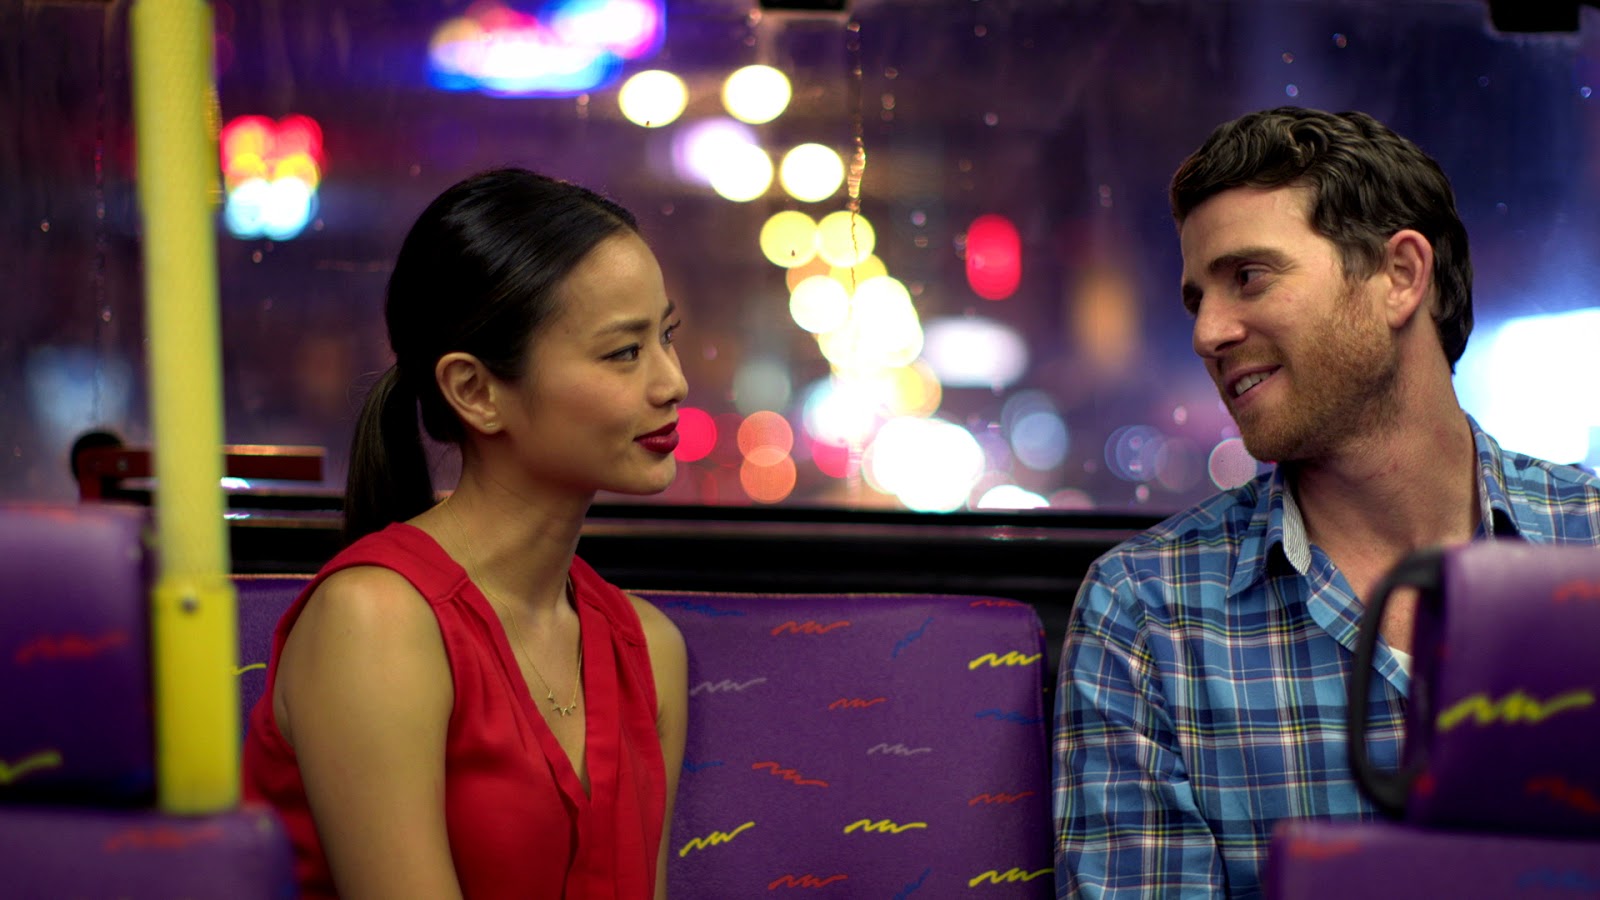 On Indie Rom-Coms, The Duvernay Test, and ‘Already Tomorrow in Hong Kong’